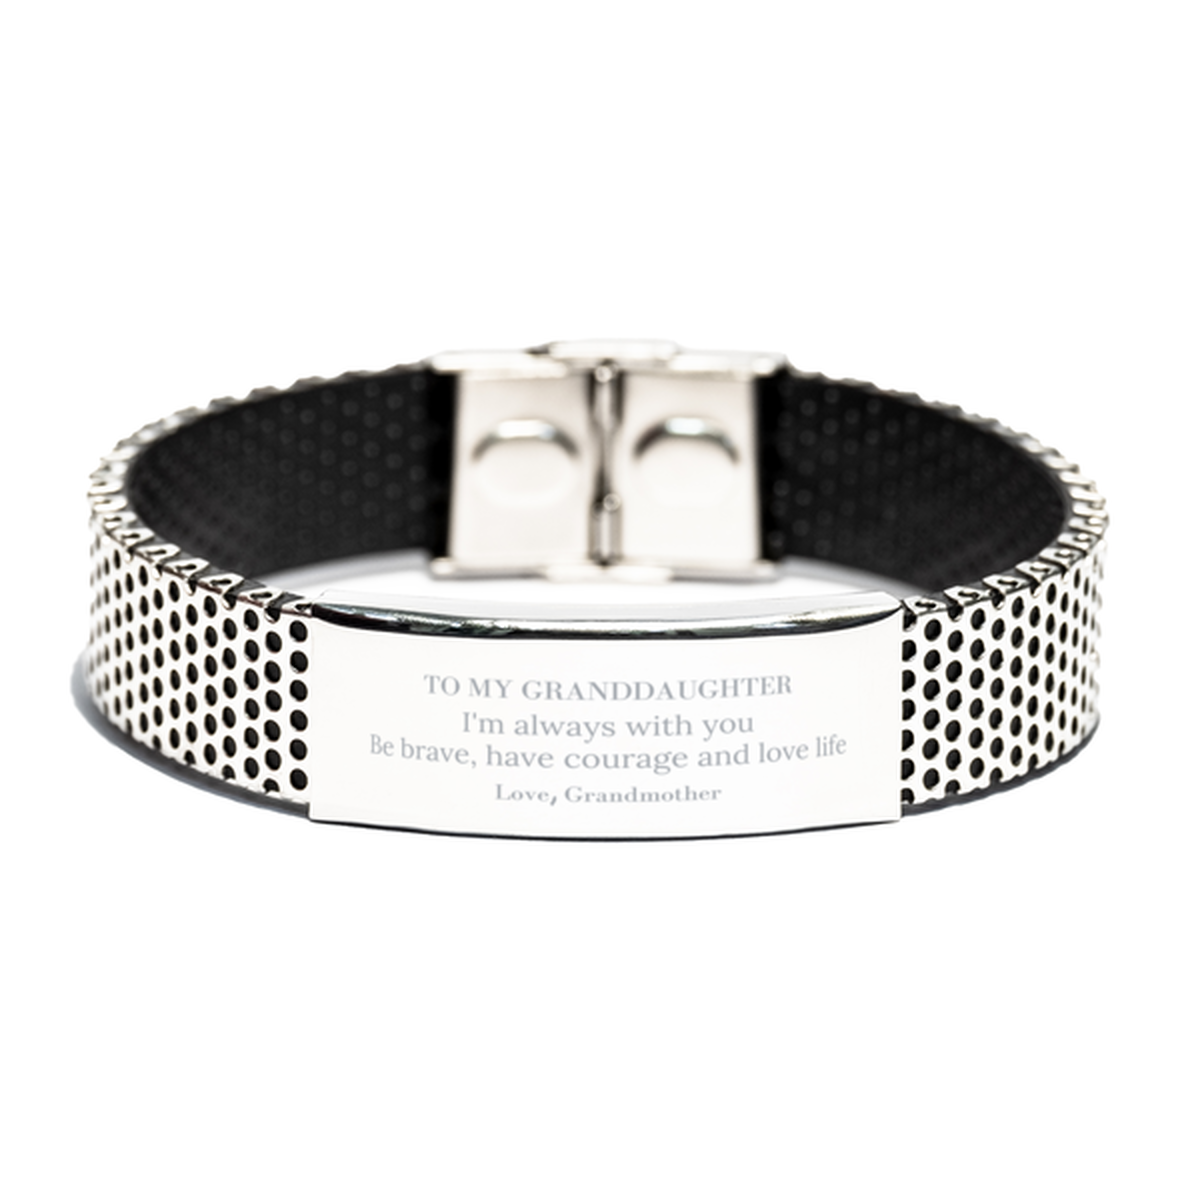 To My Granddaughter Gifts from Grandmother, Unique Stainless Steel Bracelet Inspirational Christmas Birthday Graduation Gifts for Granddaughter I'm always with you. Be brave, have courage and love life. Love, Grandmother